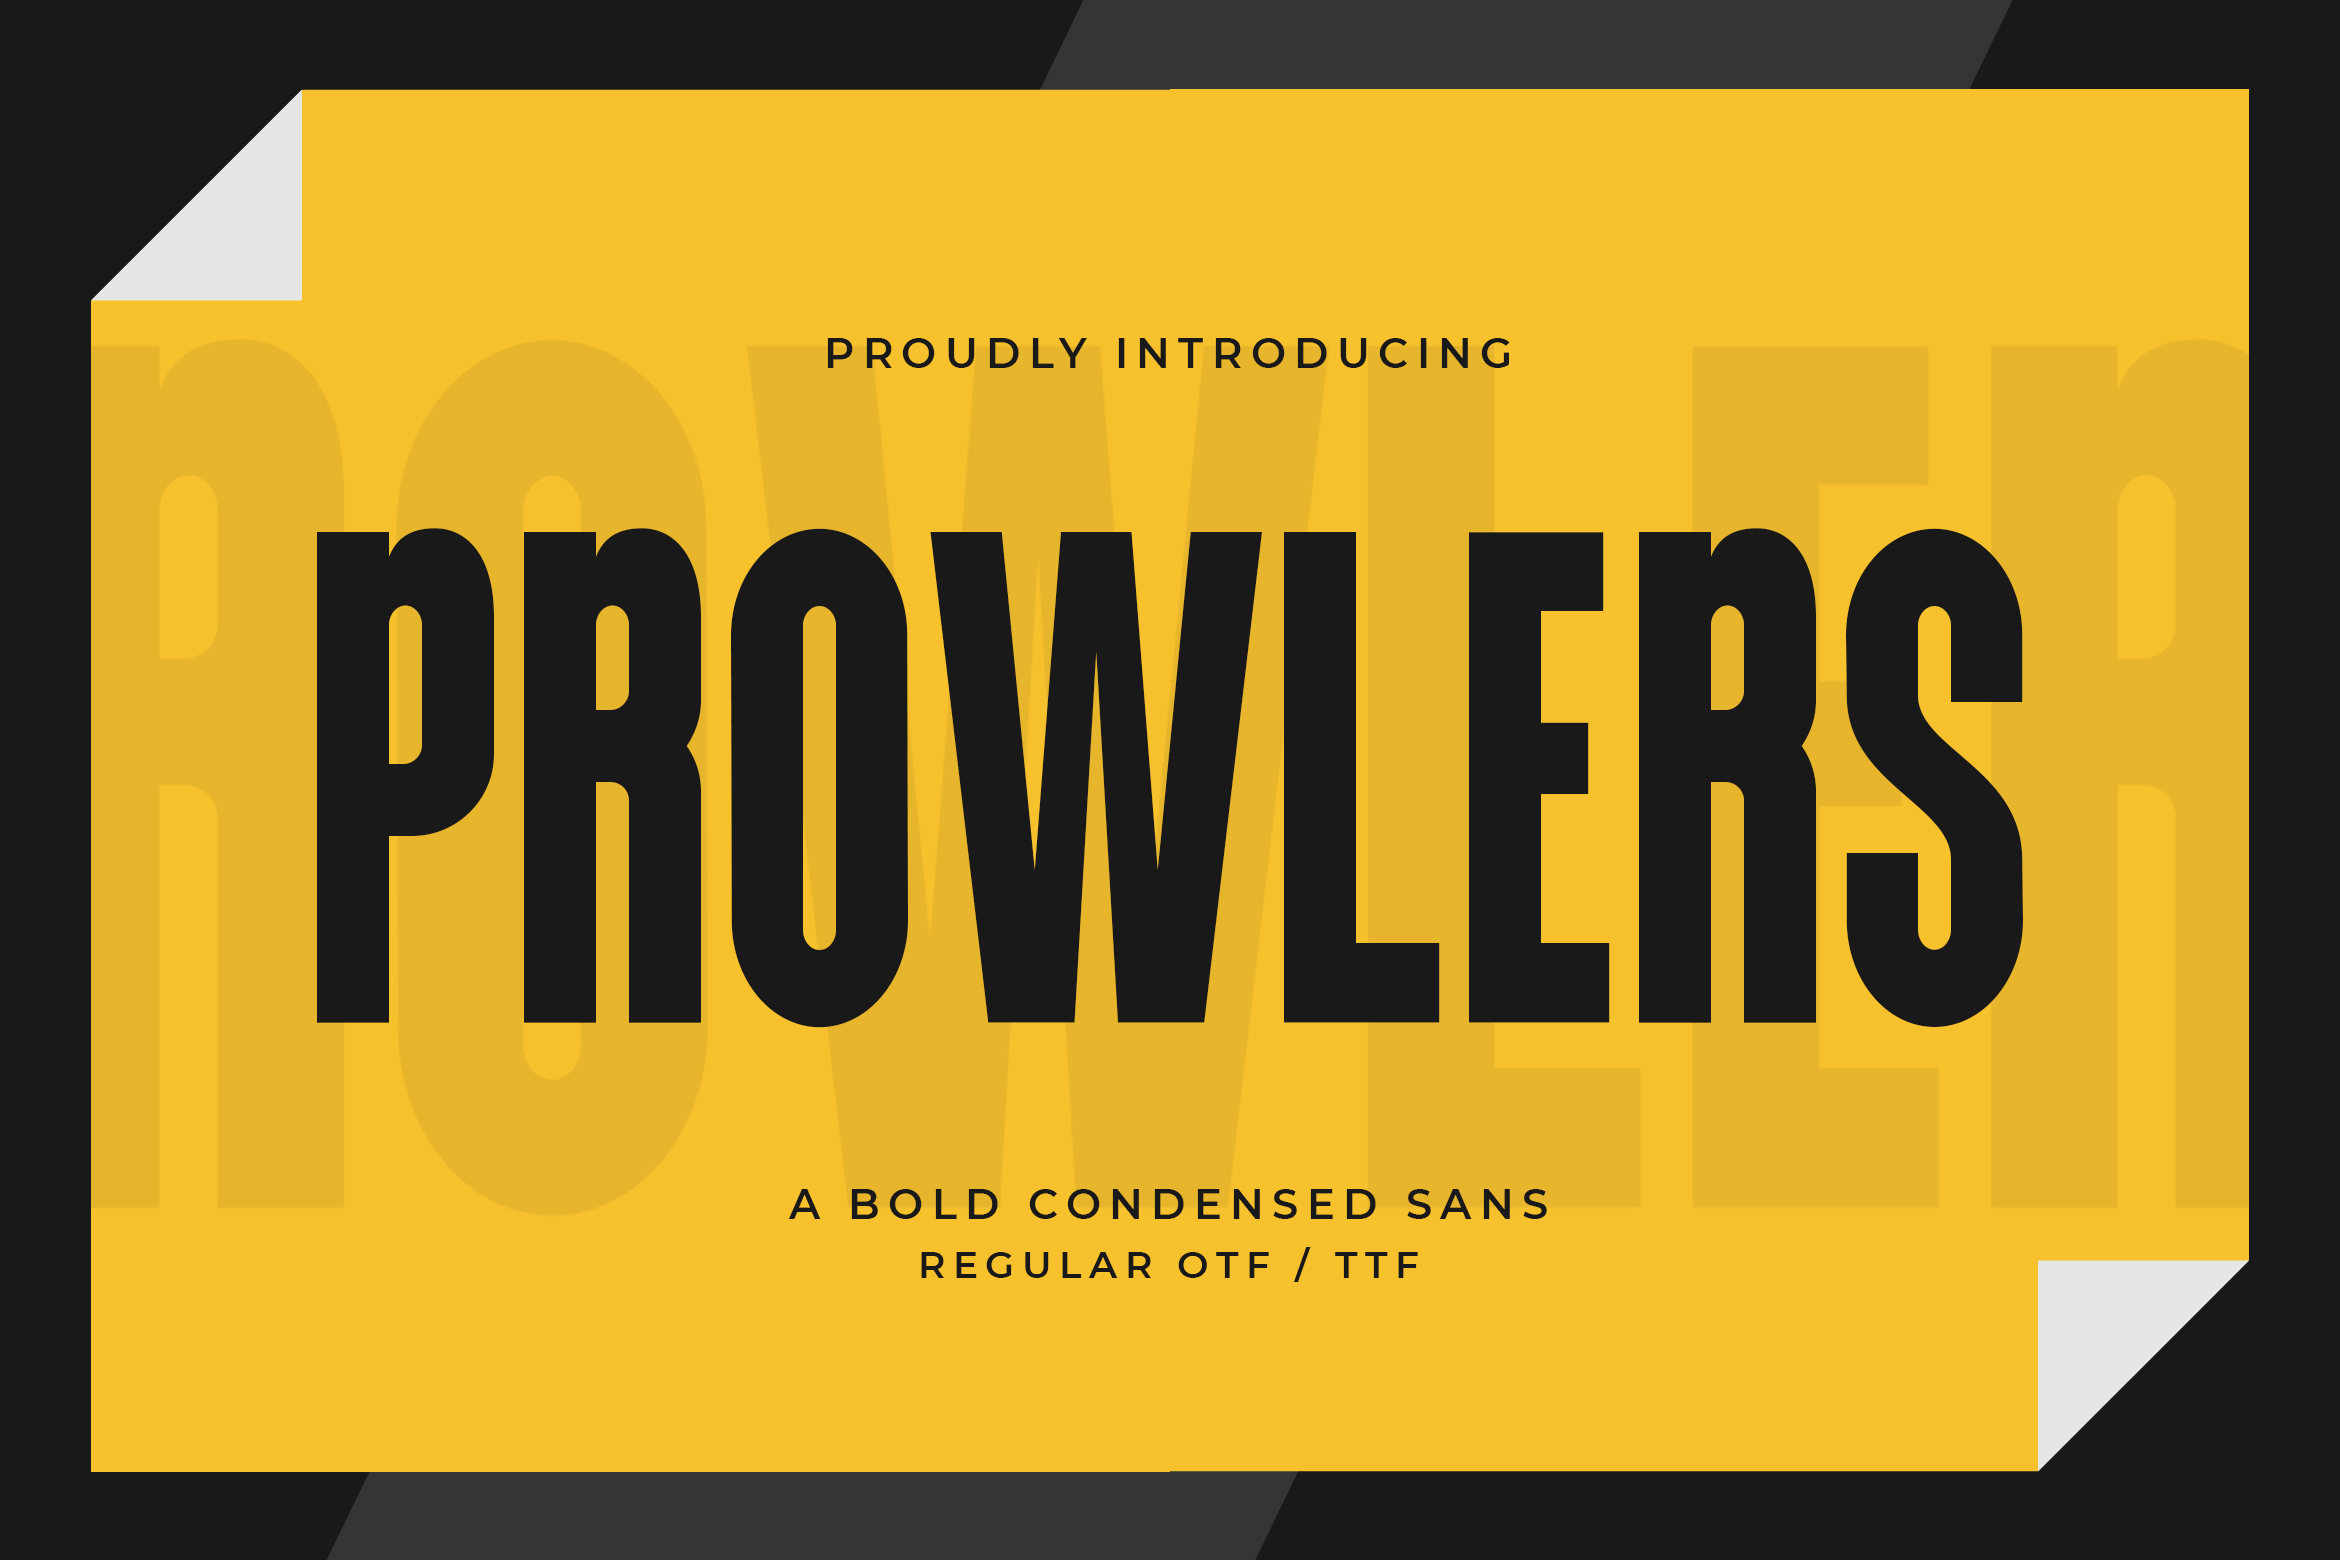 PROWLERS Free Trial